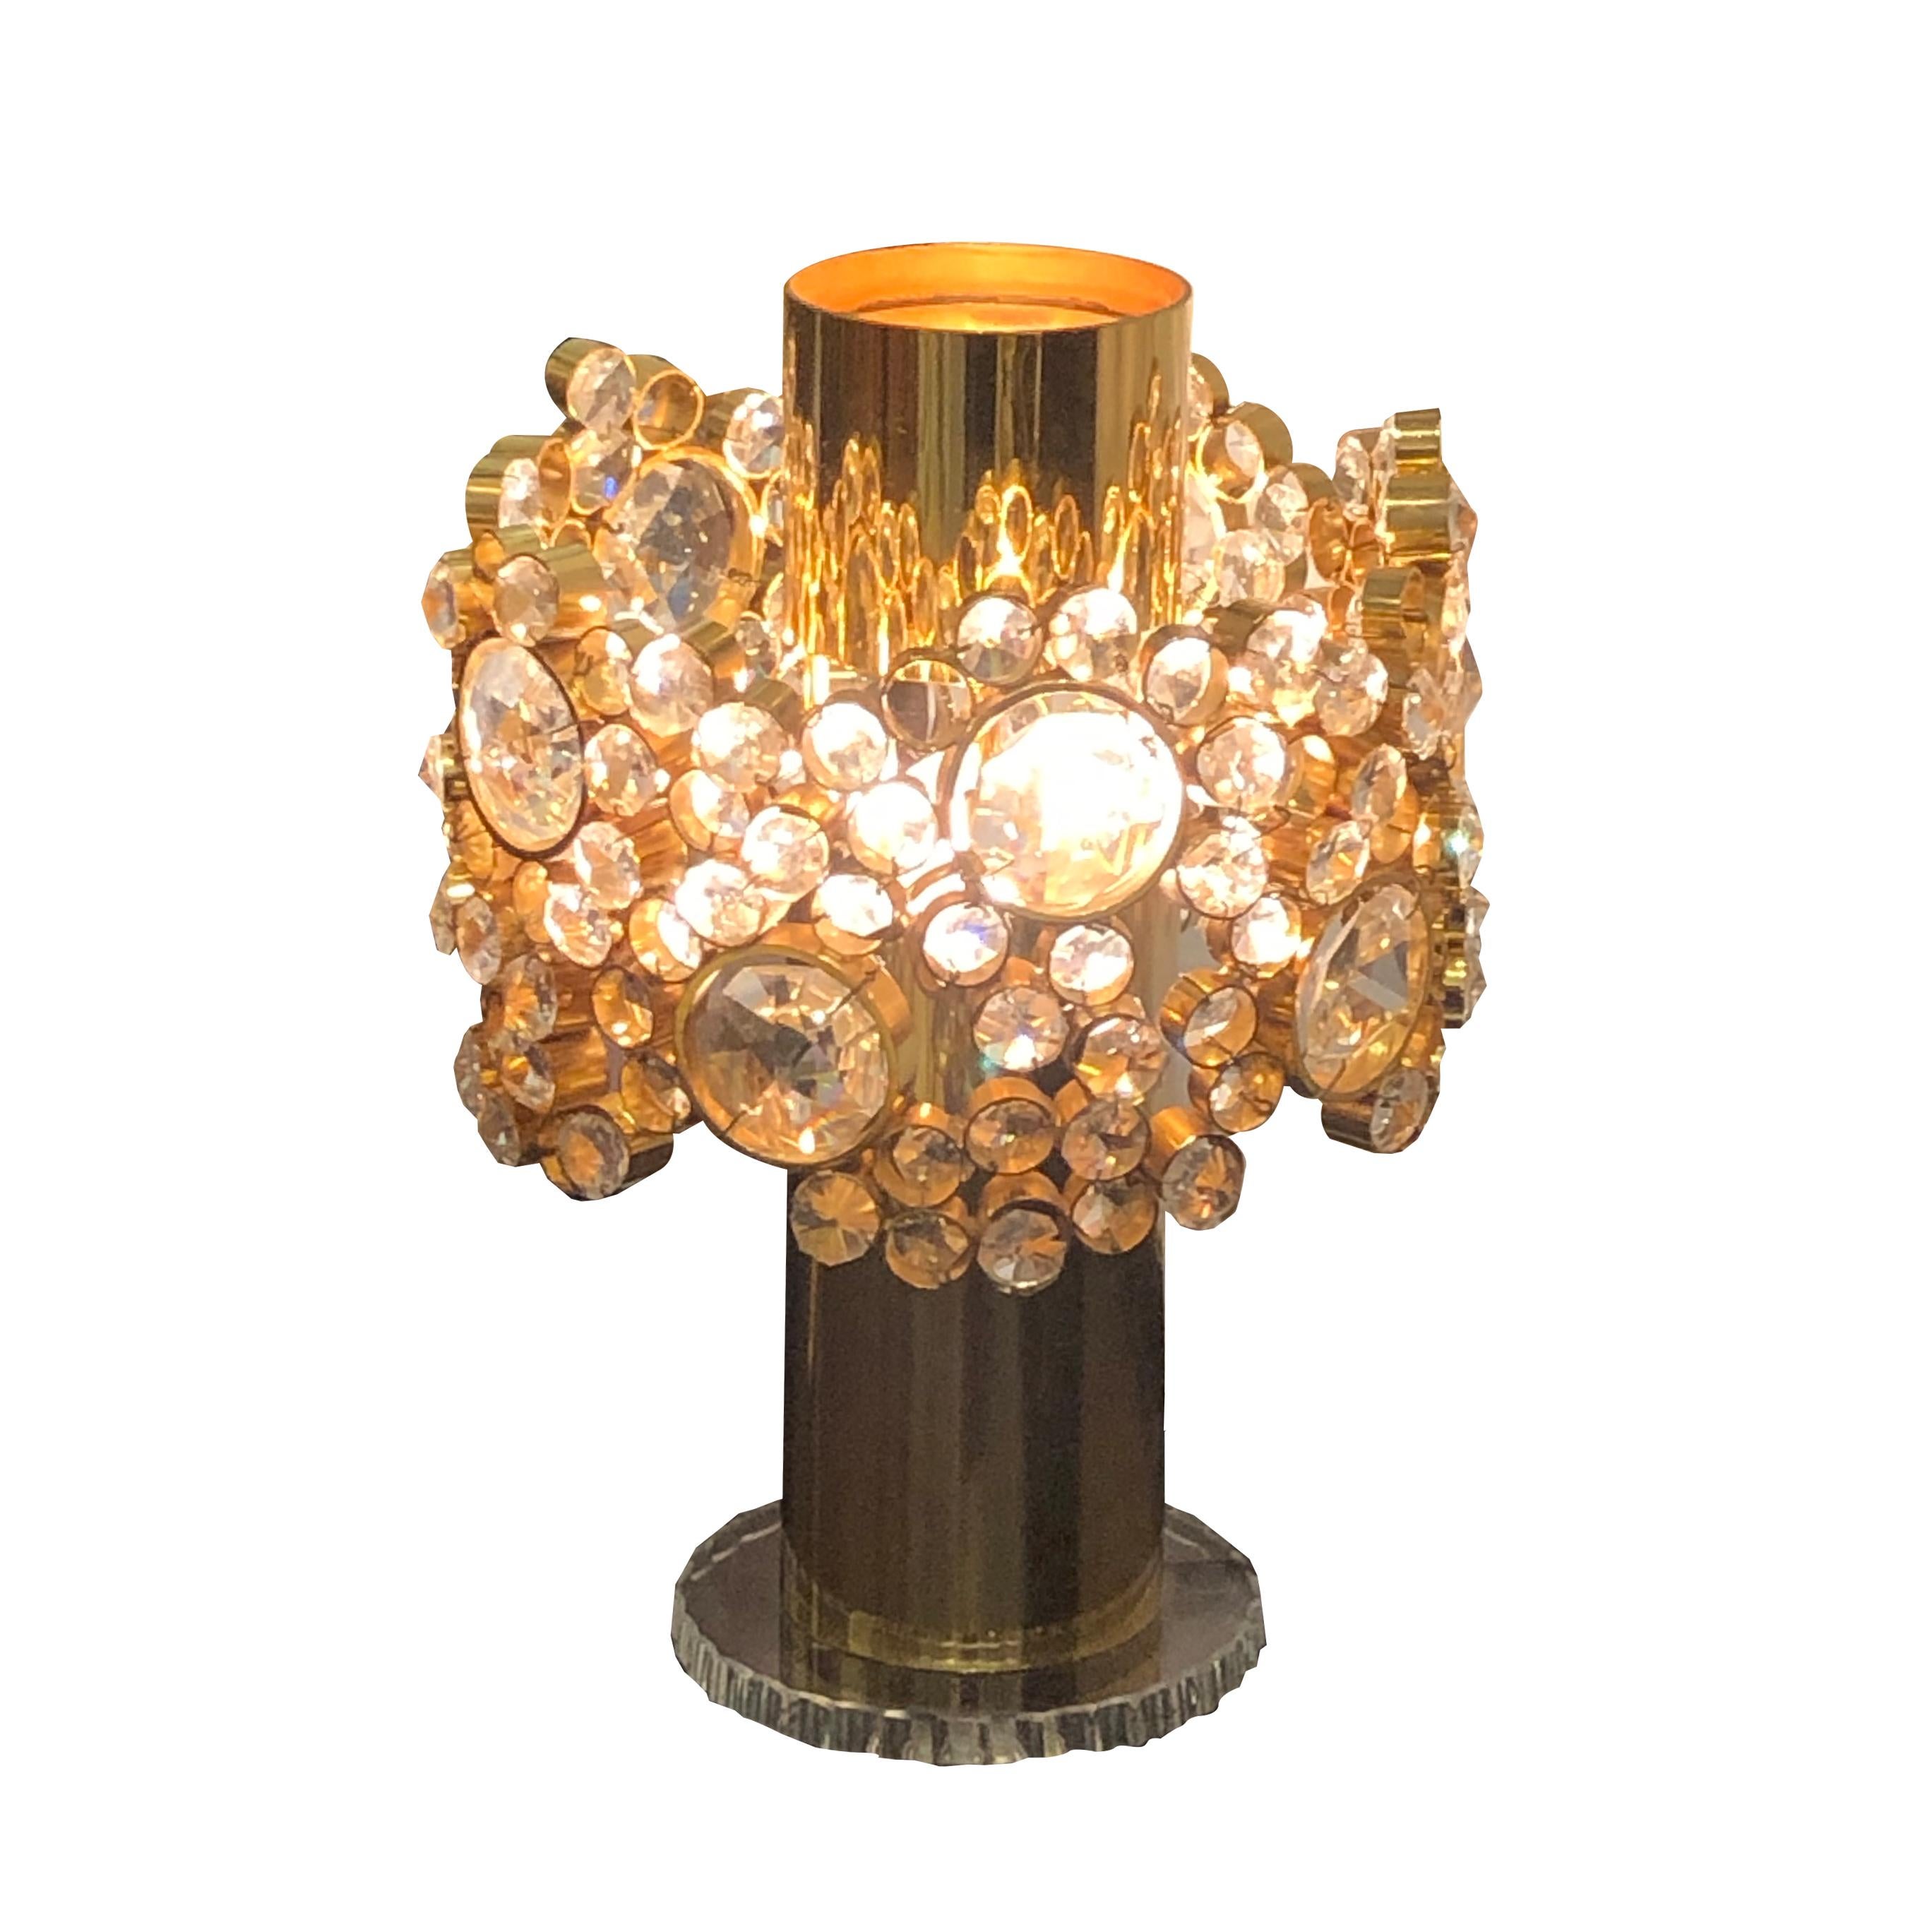 A rare model 1960s Austrian table lamp by J.L. Lobmeyr. The lamp's brass shaft is presented on a clear glass base. This is a very elegant design with a removable crown adorned with cut crystals to allow space to change the light bulbs. 

Size: H: